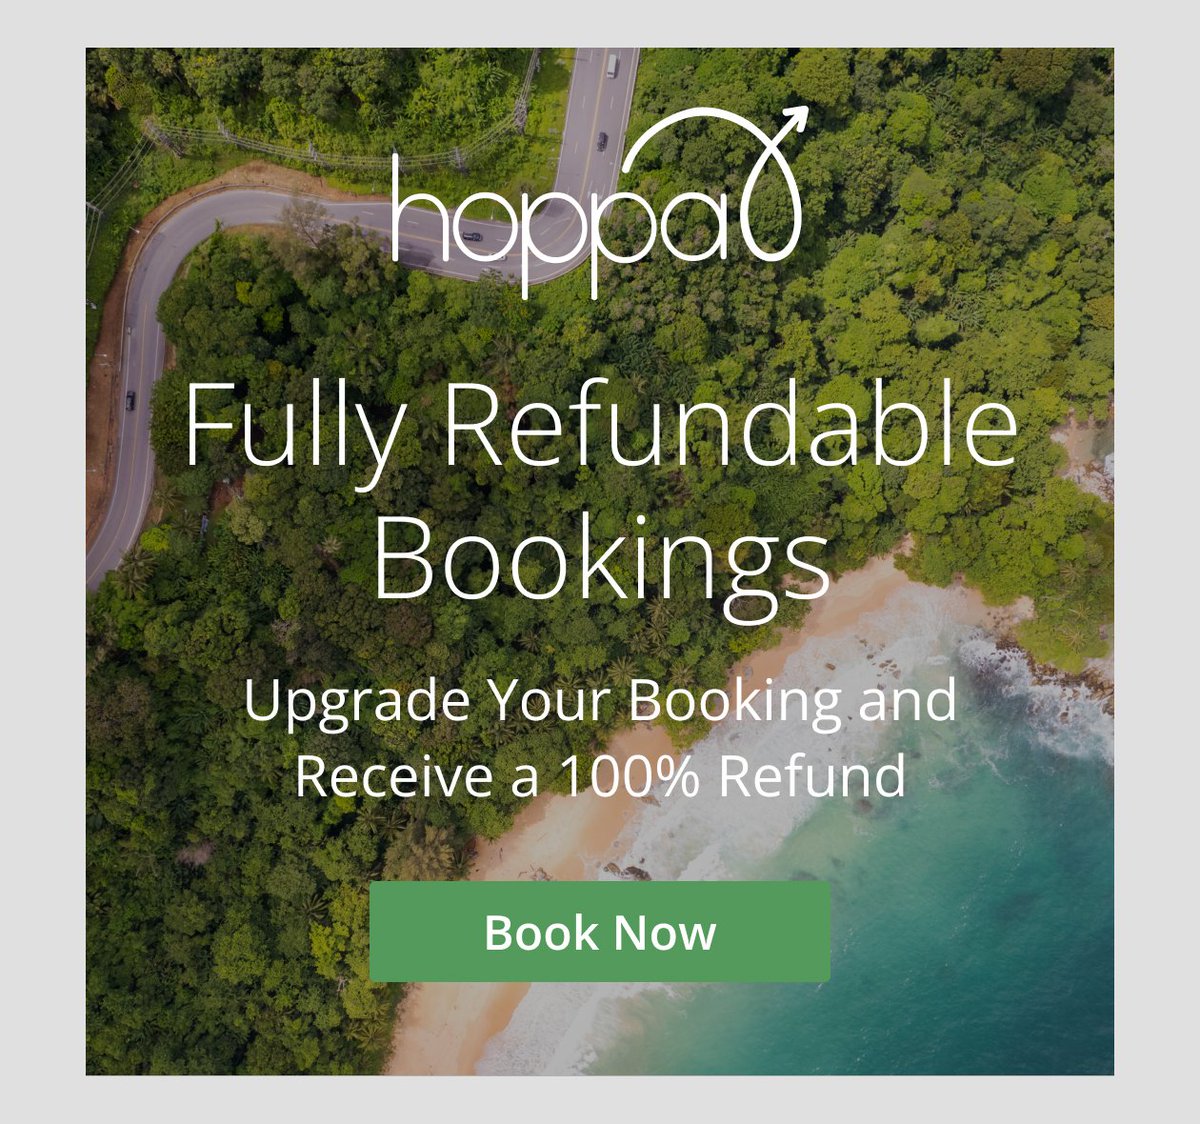 Wherever your journey takes you, don't forget to book a ride with hoppa! We'll make sure you get there safely and comfortably. Travelling soon? #ArriveHappy. - bit.ly/2S2enDY #airporttransfers #hoppa #UKTravellers